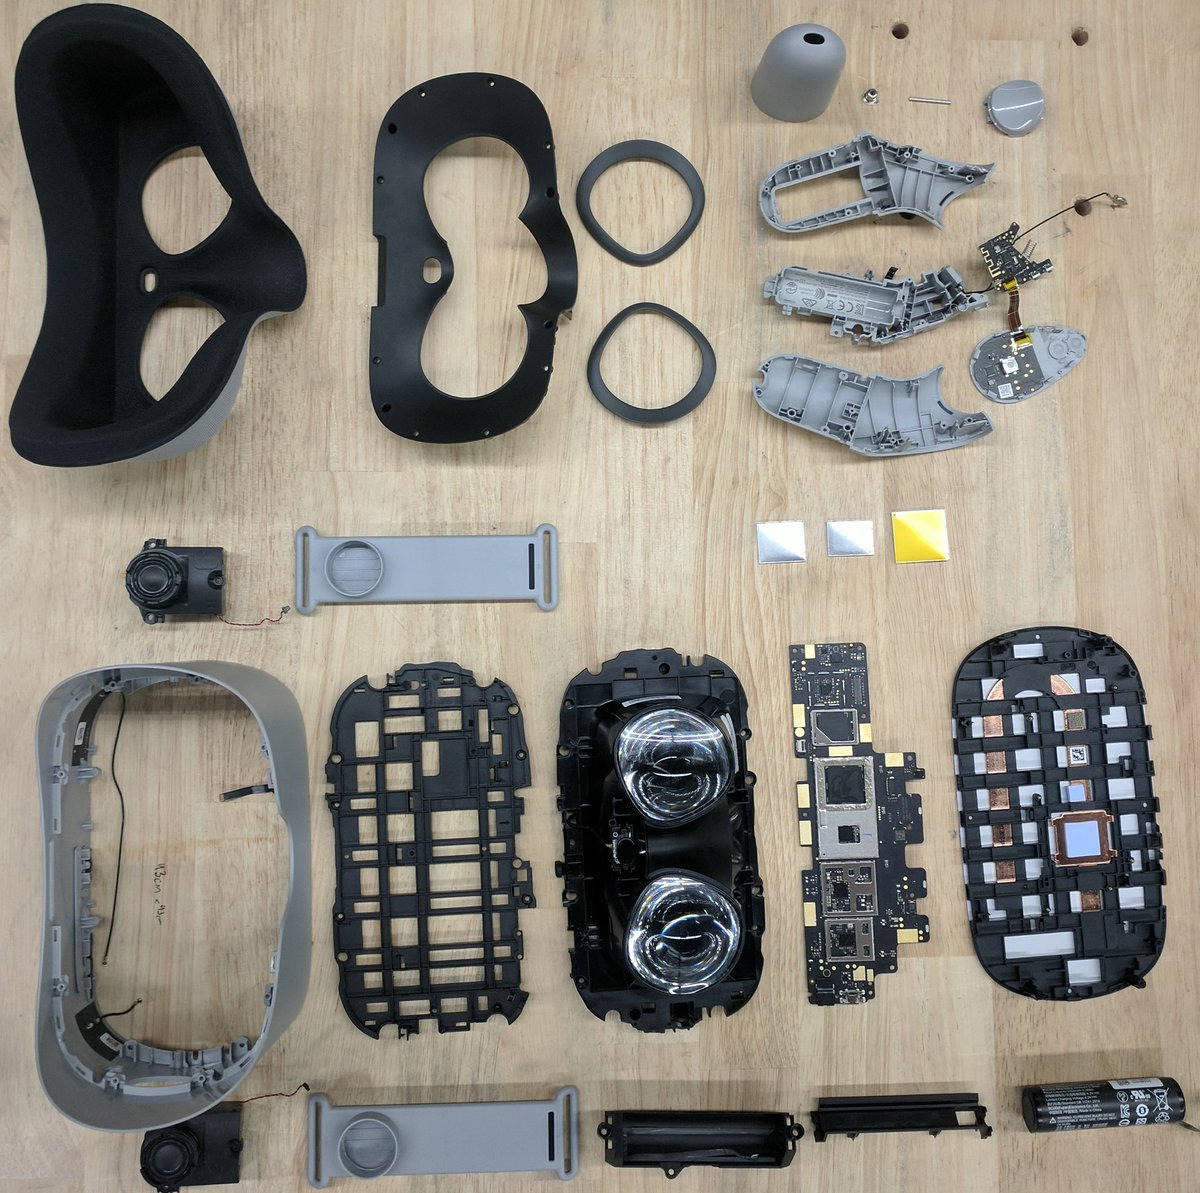 Disassembled Oculus Go, battery — at the bottom on the right